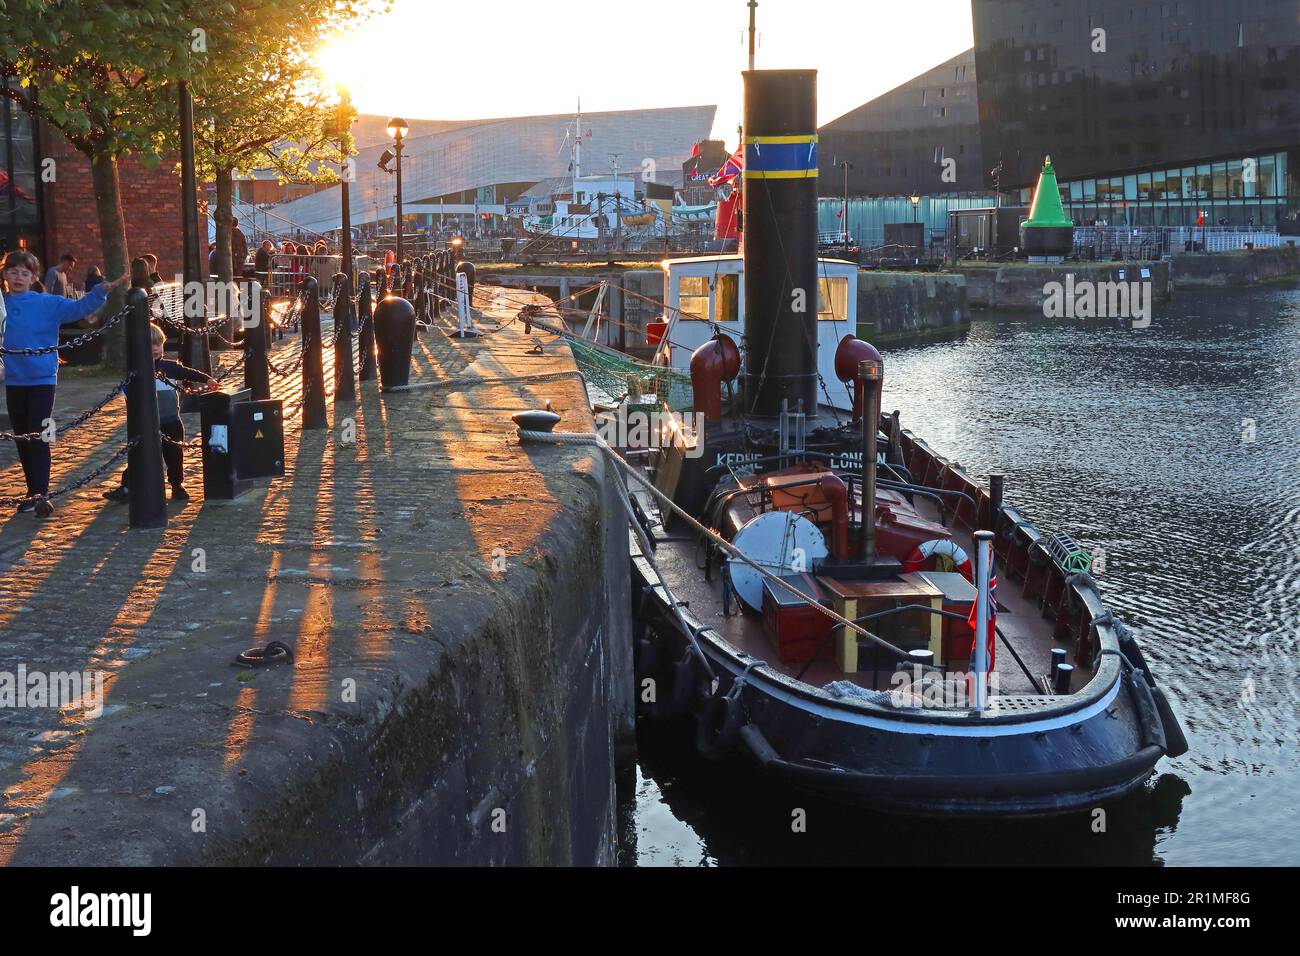 Steam powered tug, the Kerne, on the Mersey waterfront, at sunset - Albert Dock, Pier Head, Liverpool, Merseyside, England, UK, L3 4AF Stock Photo